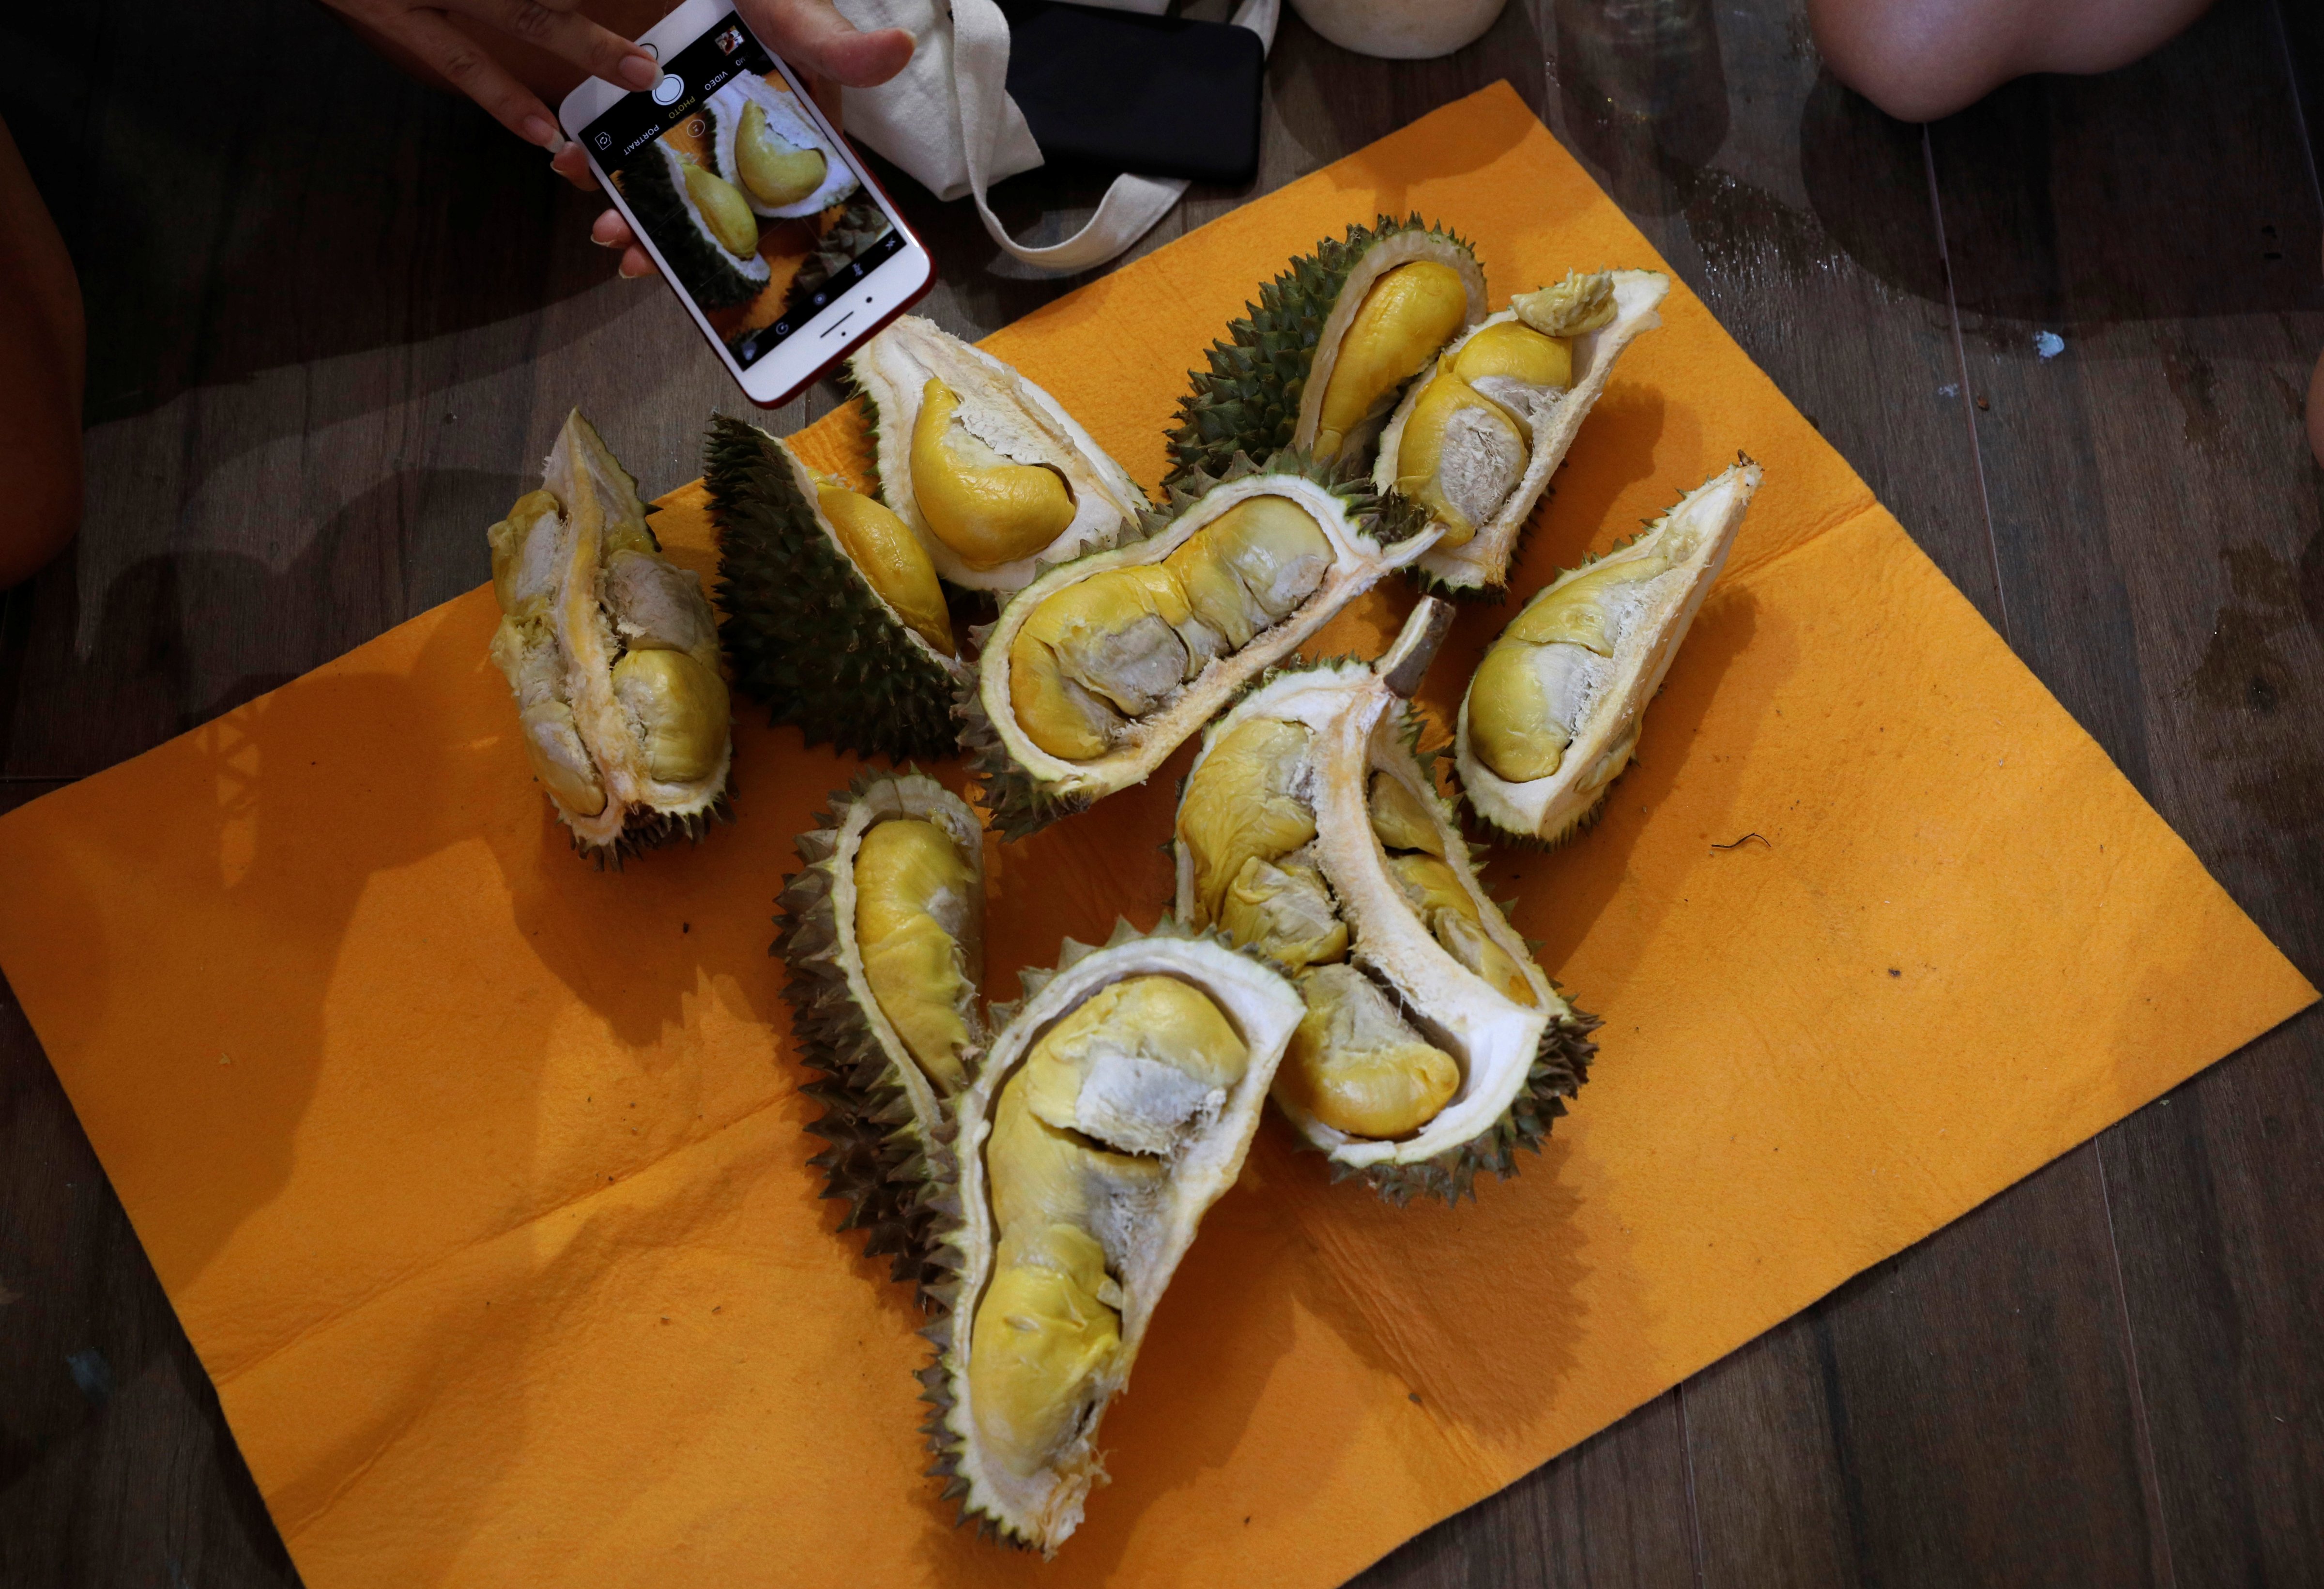 Participants take photos of durians after the Durian Run, a charity event, in Singapore on July 23, 2017. (Edgar Su&mdash;Reuters)